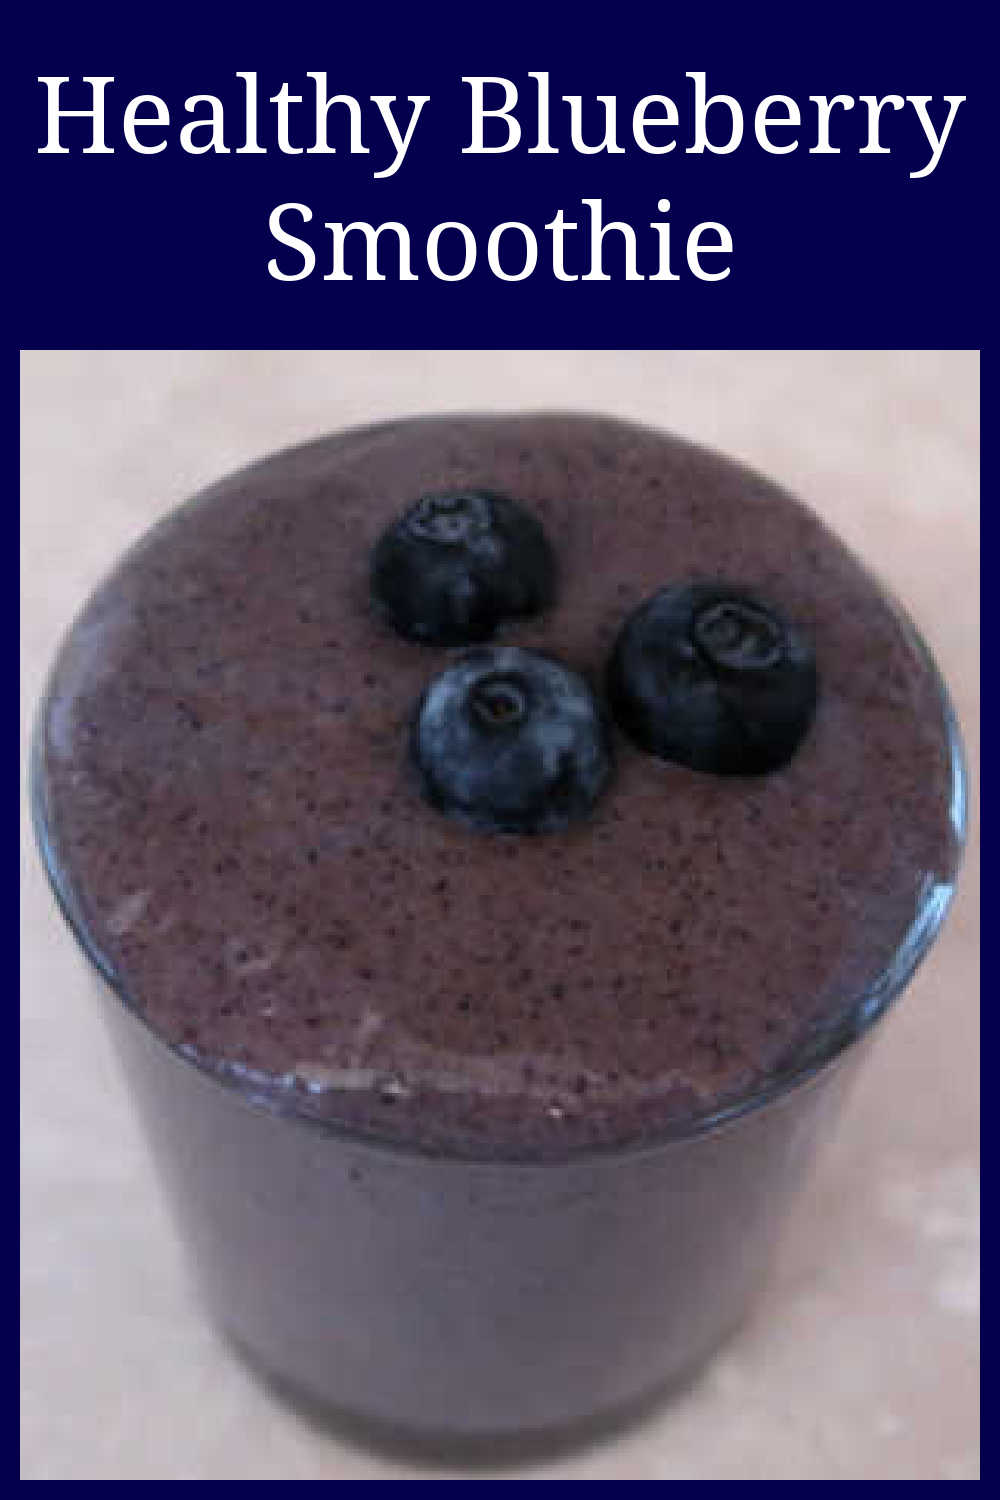 Healthy Blueberry Smoothie Recipe - How to make the best easy smoothies with blueberries, lemon and chia seeds - makes a delicious breakfast or healthy treat - with the video tutorial.